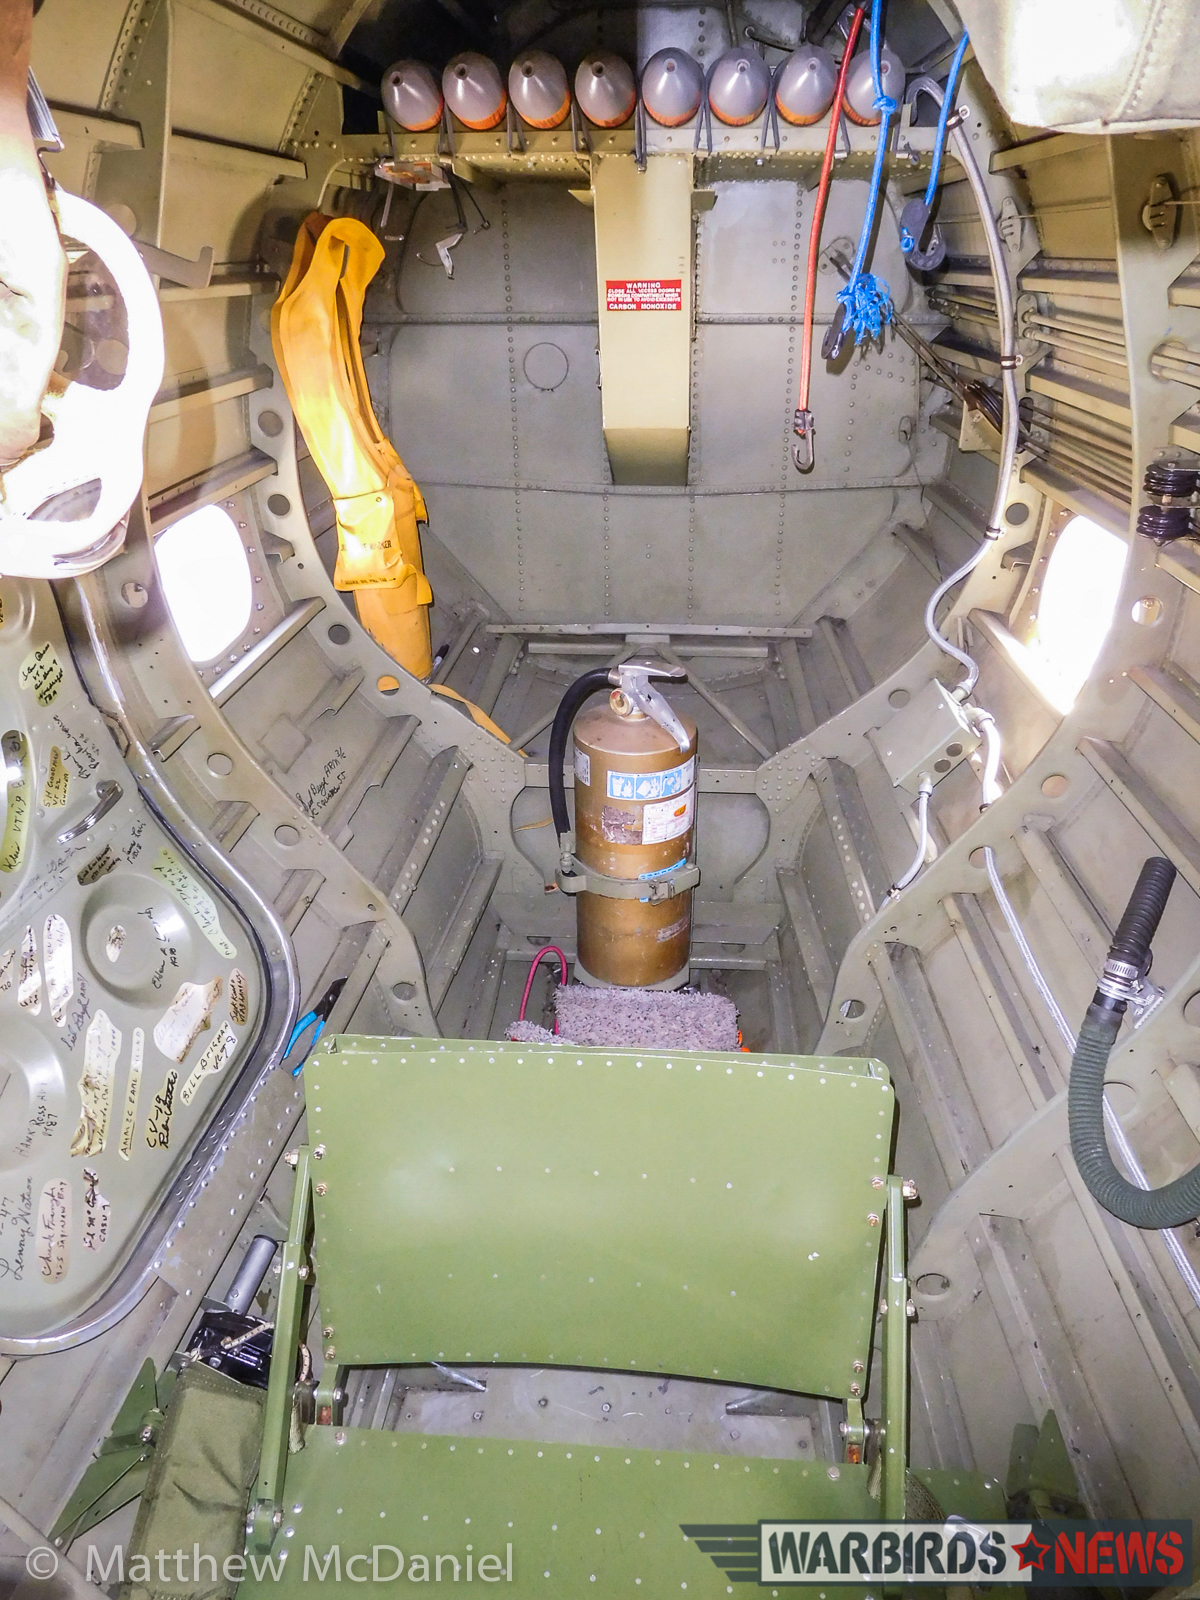 The bombardier/radioman position in the lower tail of Deckert's TBM (looking aft). Earlier versions of the TBM included a ventral machine gun and additional window when the fire-extinguisher sits in this later -3 model. Note the signatures on the compartment's entry hatch; They are those of WWII-vet TBM crew members who've been reunited with the TBM by Deckert and his team. (Photo by Matthew McDaniel)